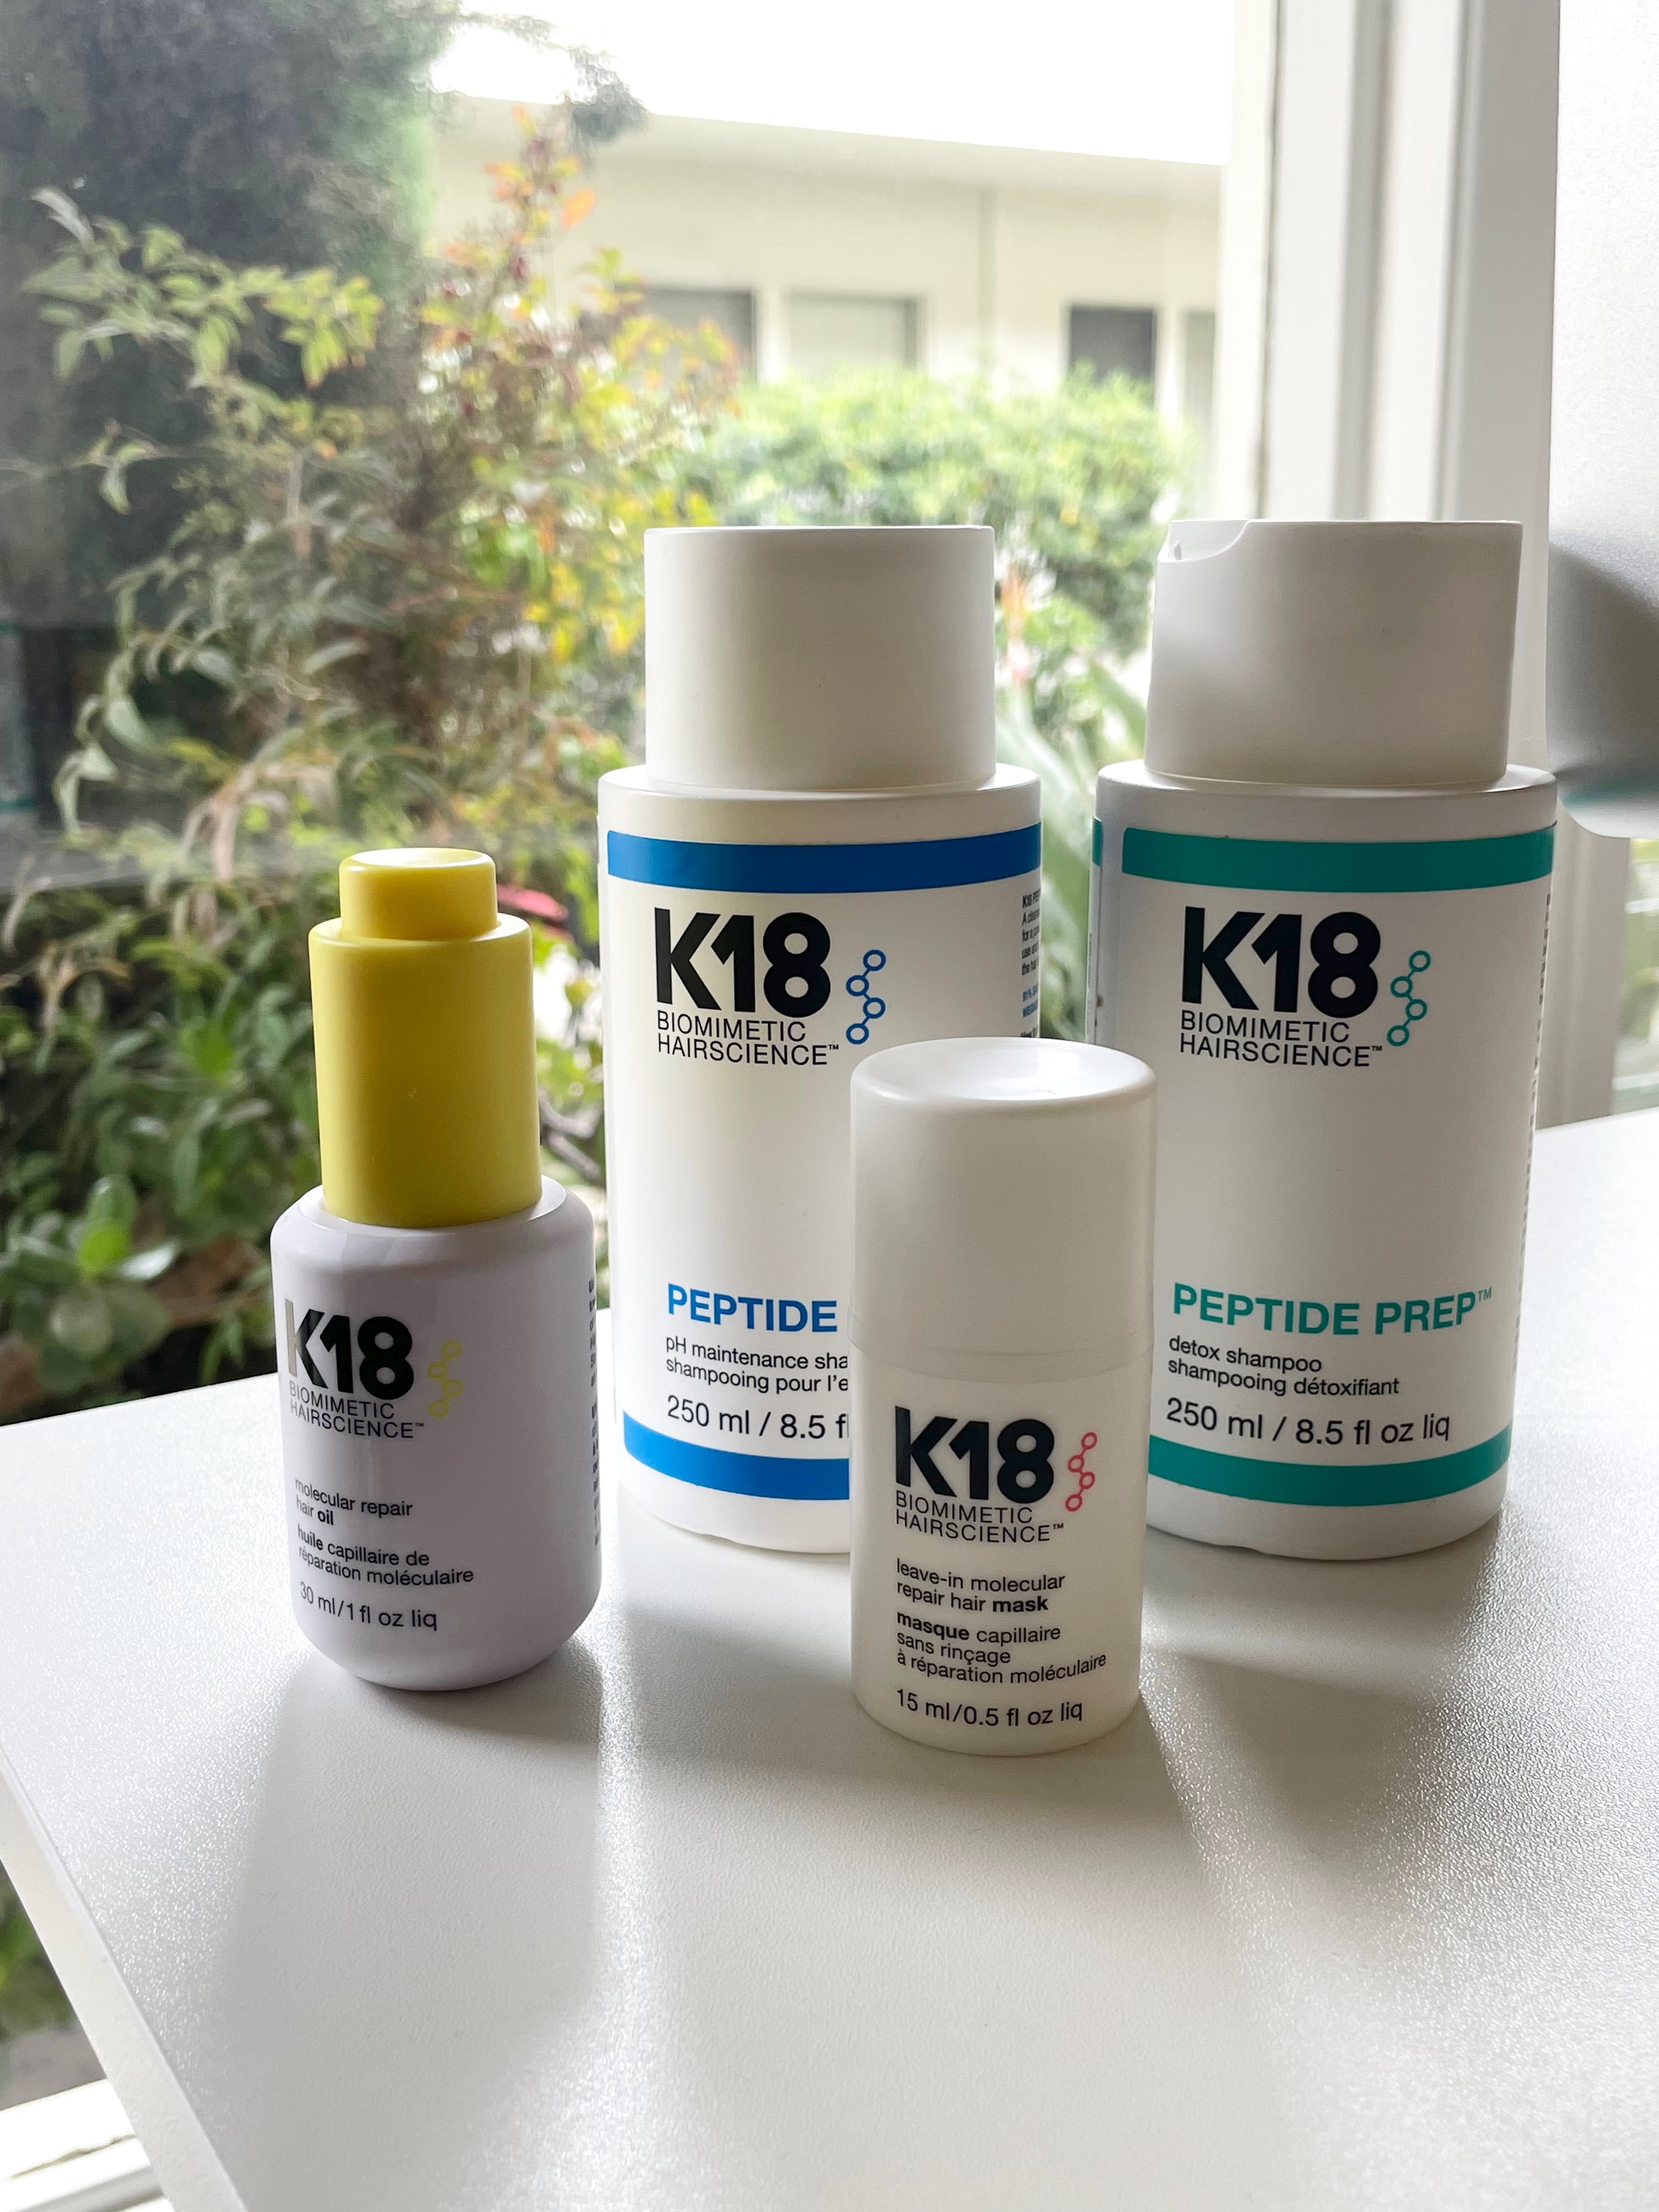 K18 Hair Product Reviews With Photos | POPSUGAR Beauty